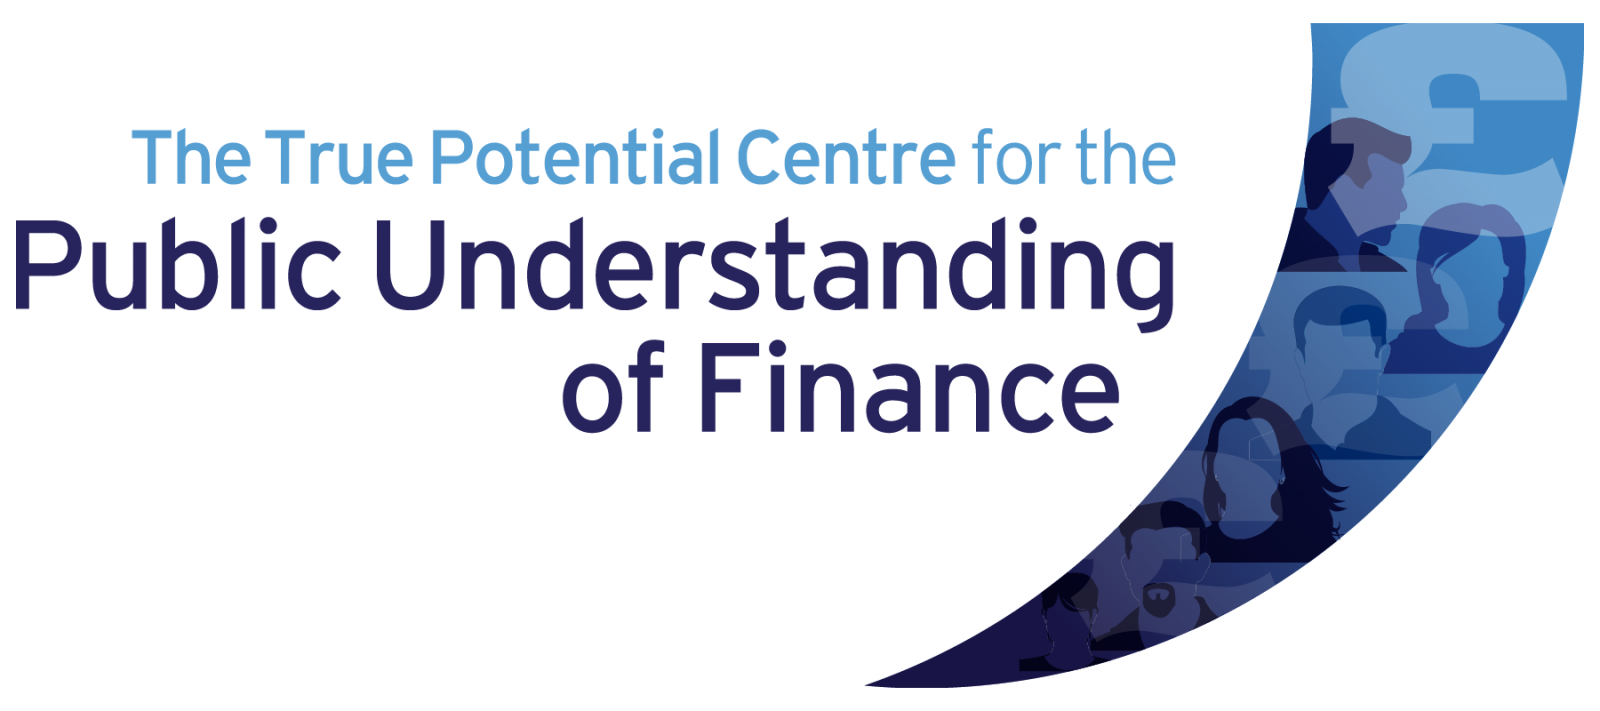 The True Potential Centre for the Public Understanding of Finance logo